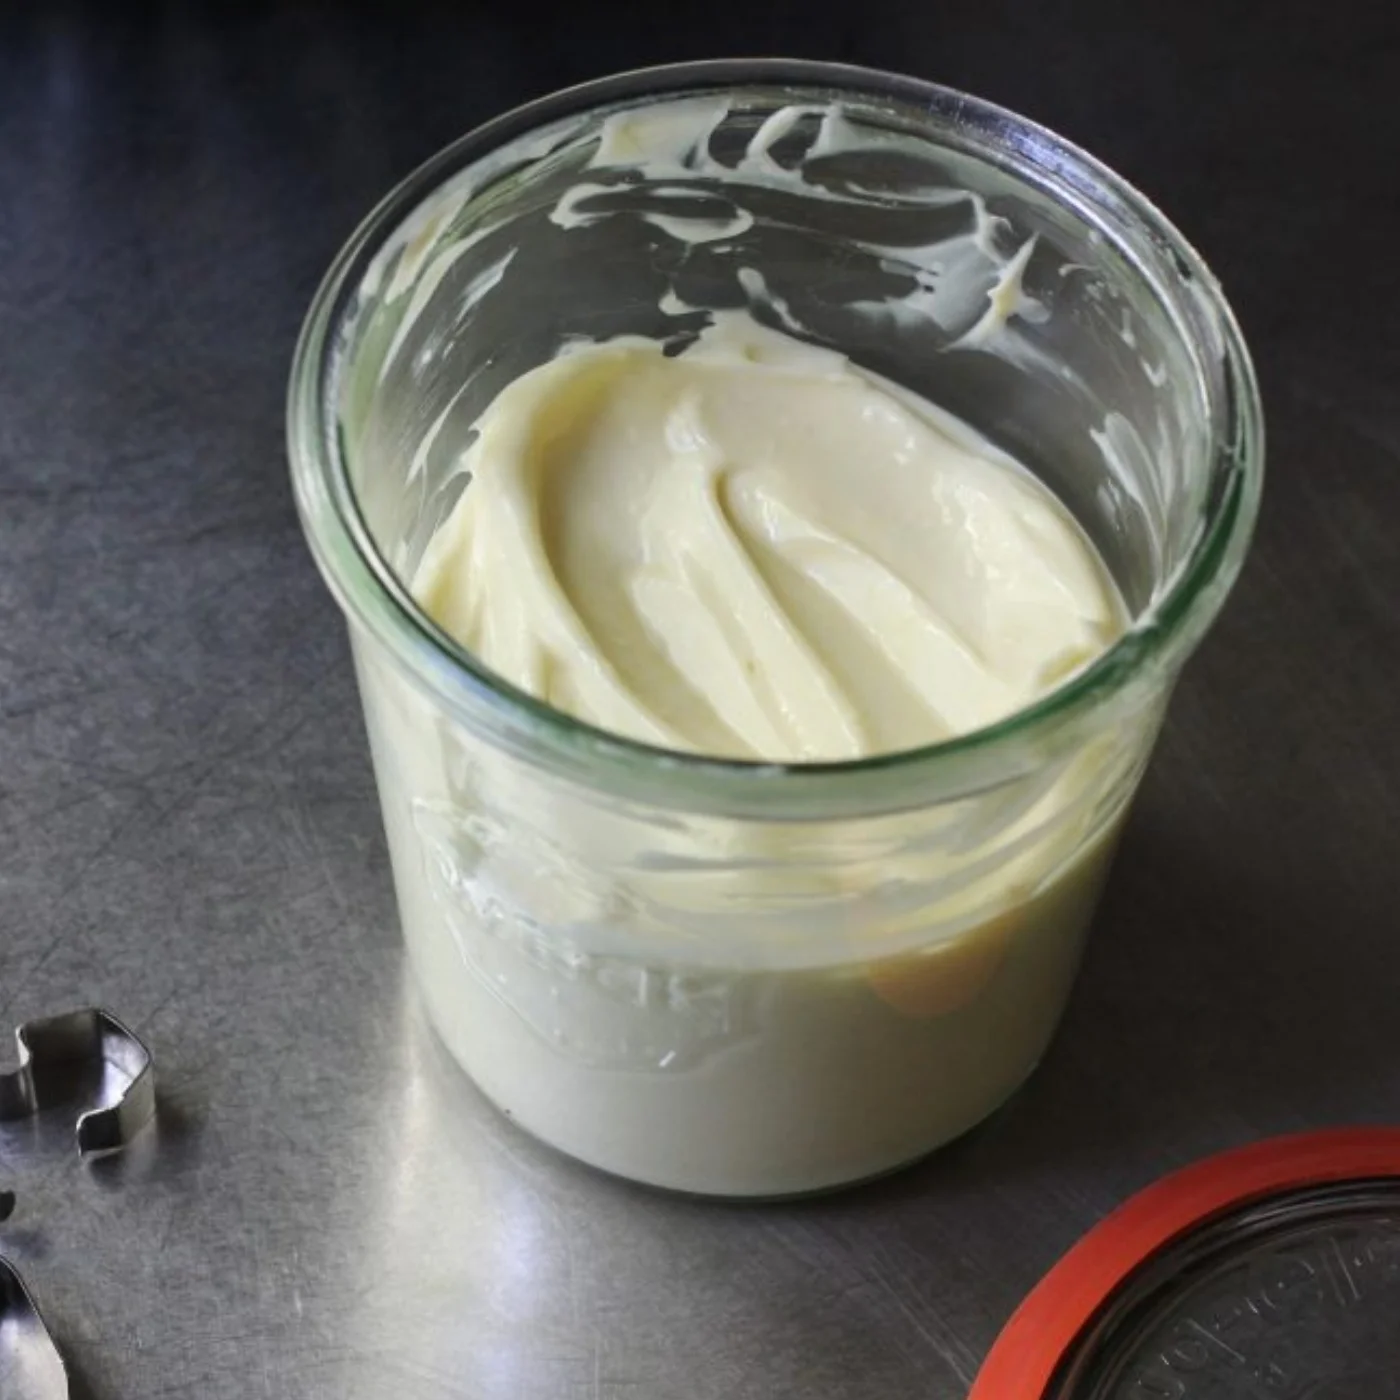 Homemade Olive Oil Mayonnaise in a jar